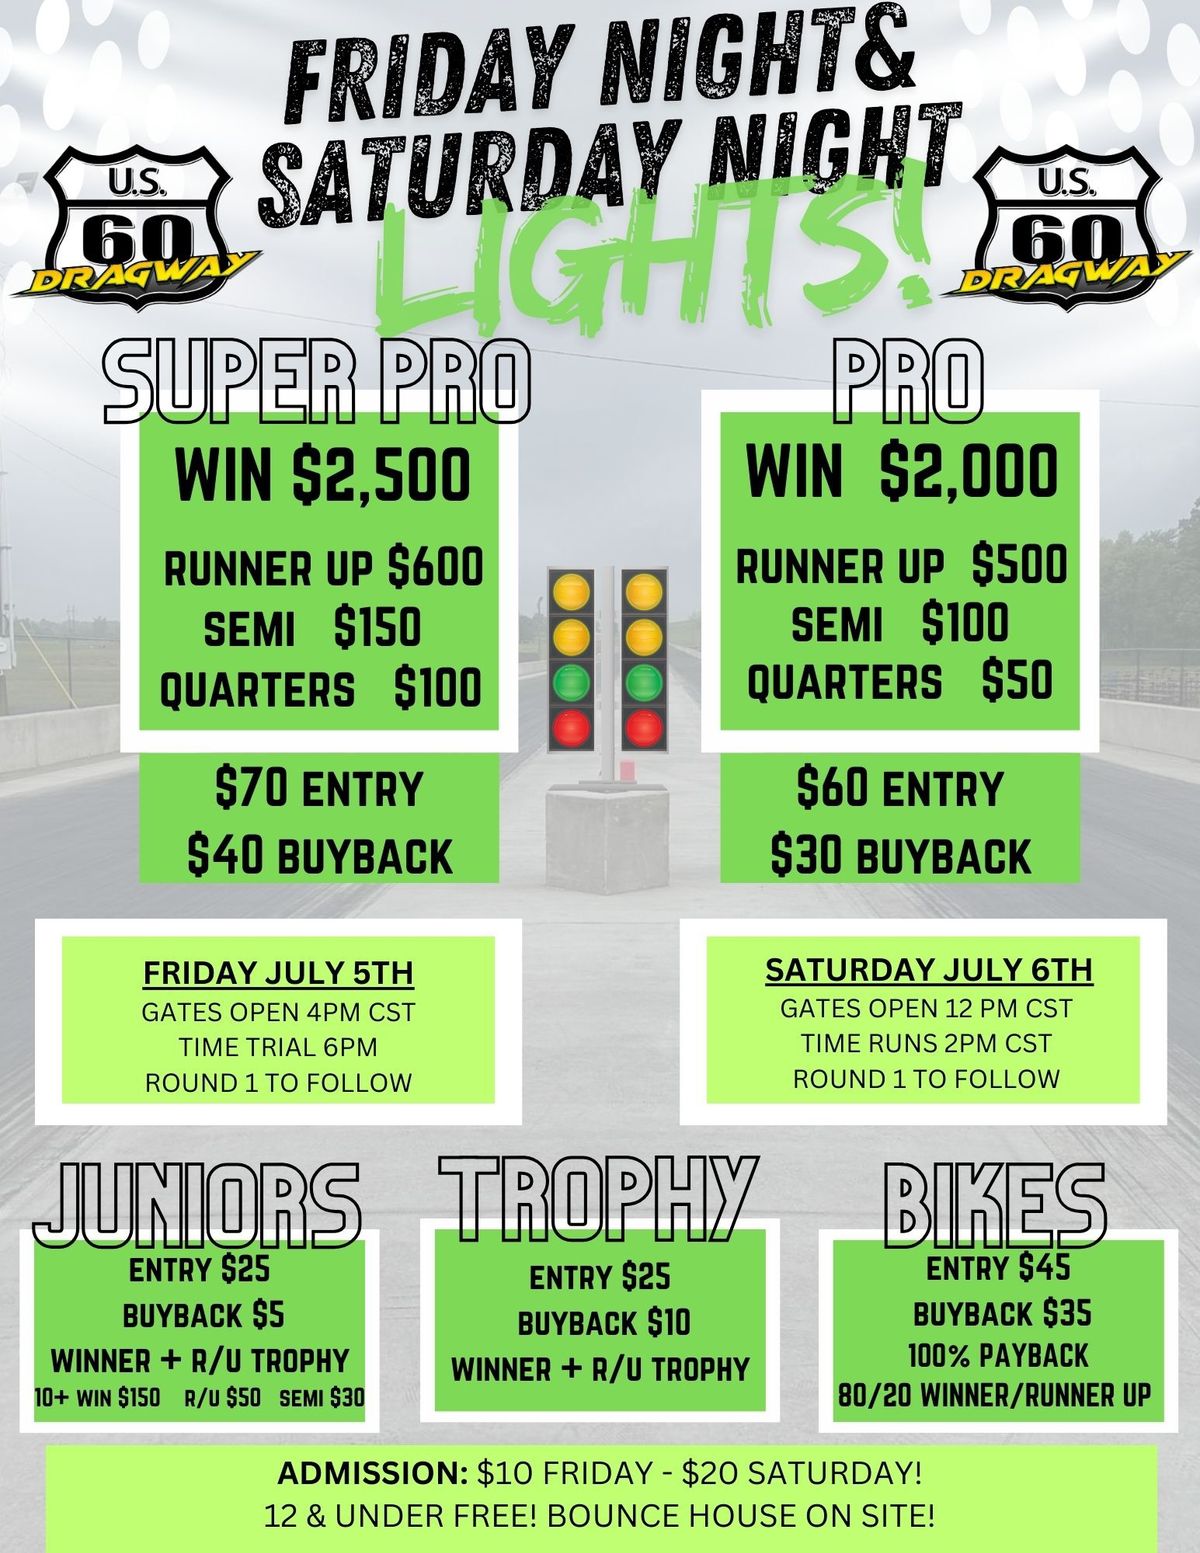 Friday & Saturday Night Lights!! 2-DAY EVENT AT US 60 DRAGWAY!! 